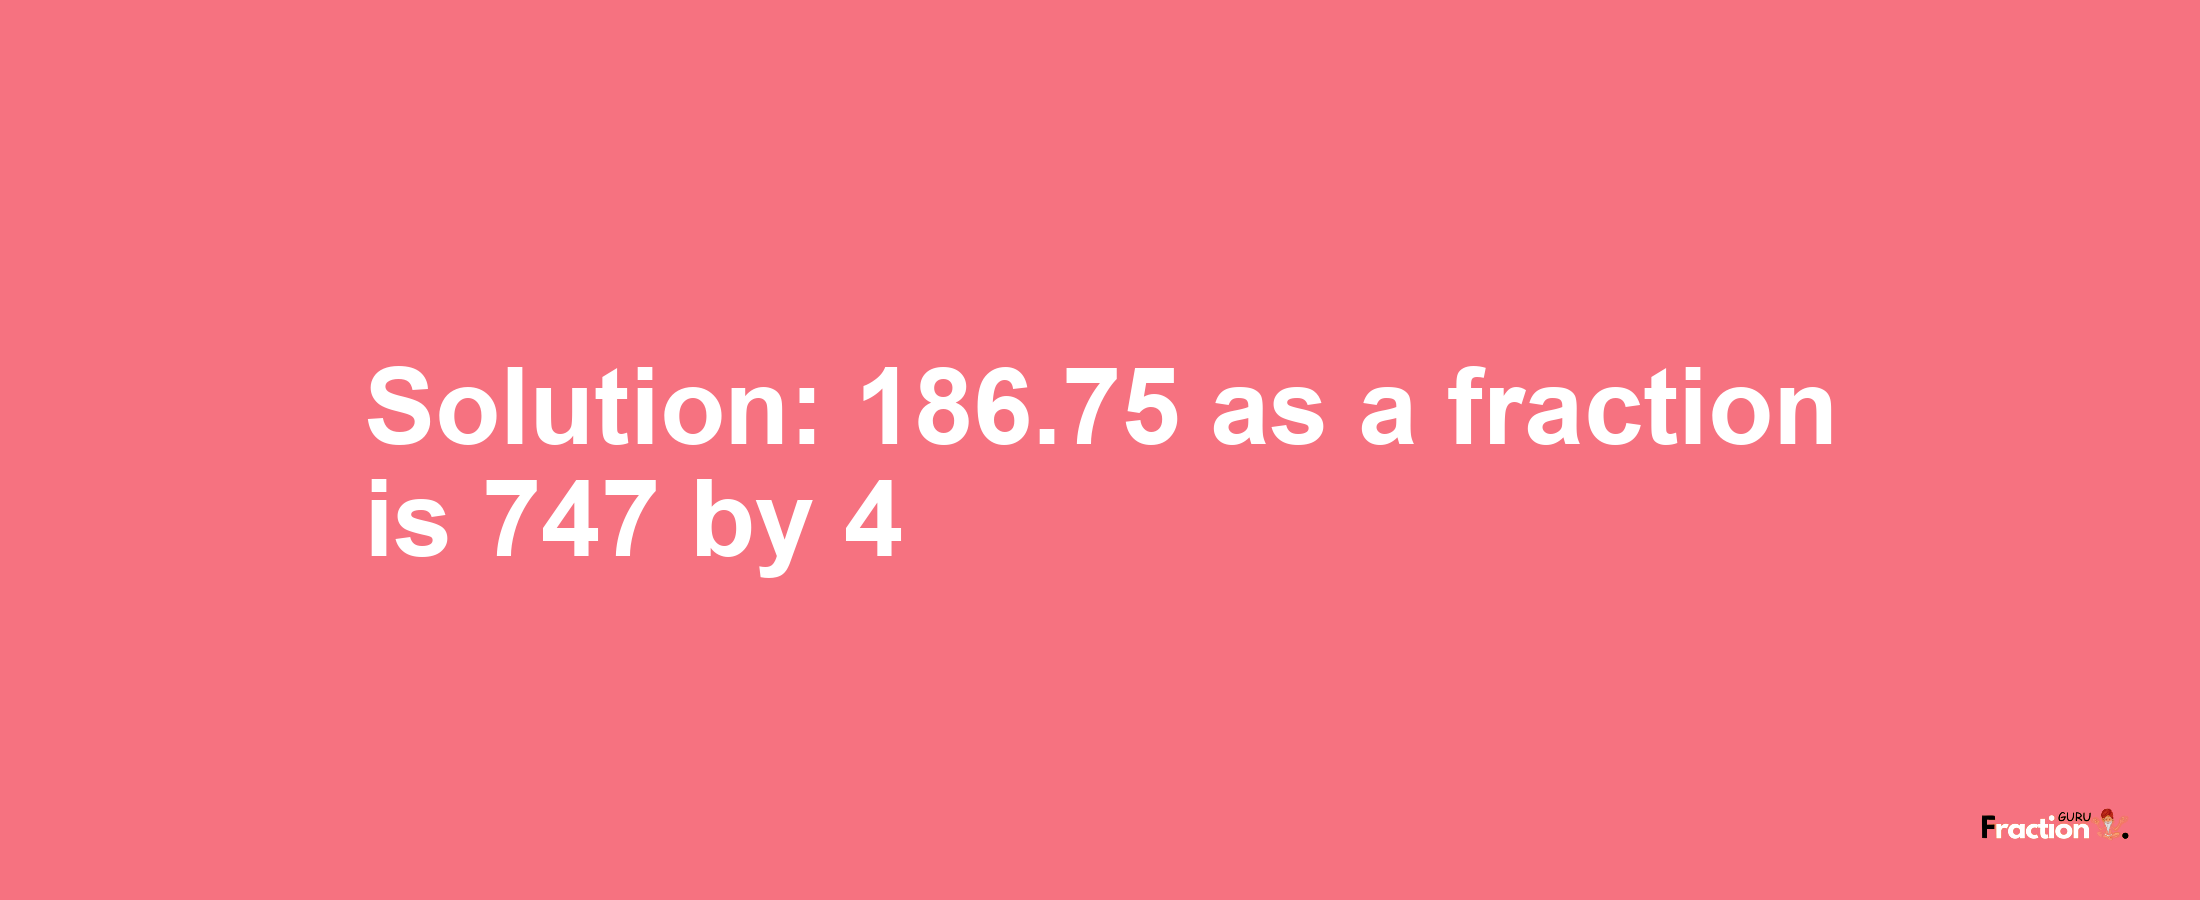 Solution:186.75 as a fraction is 747/4